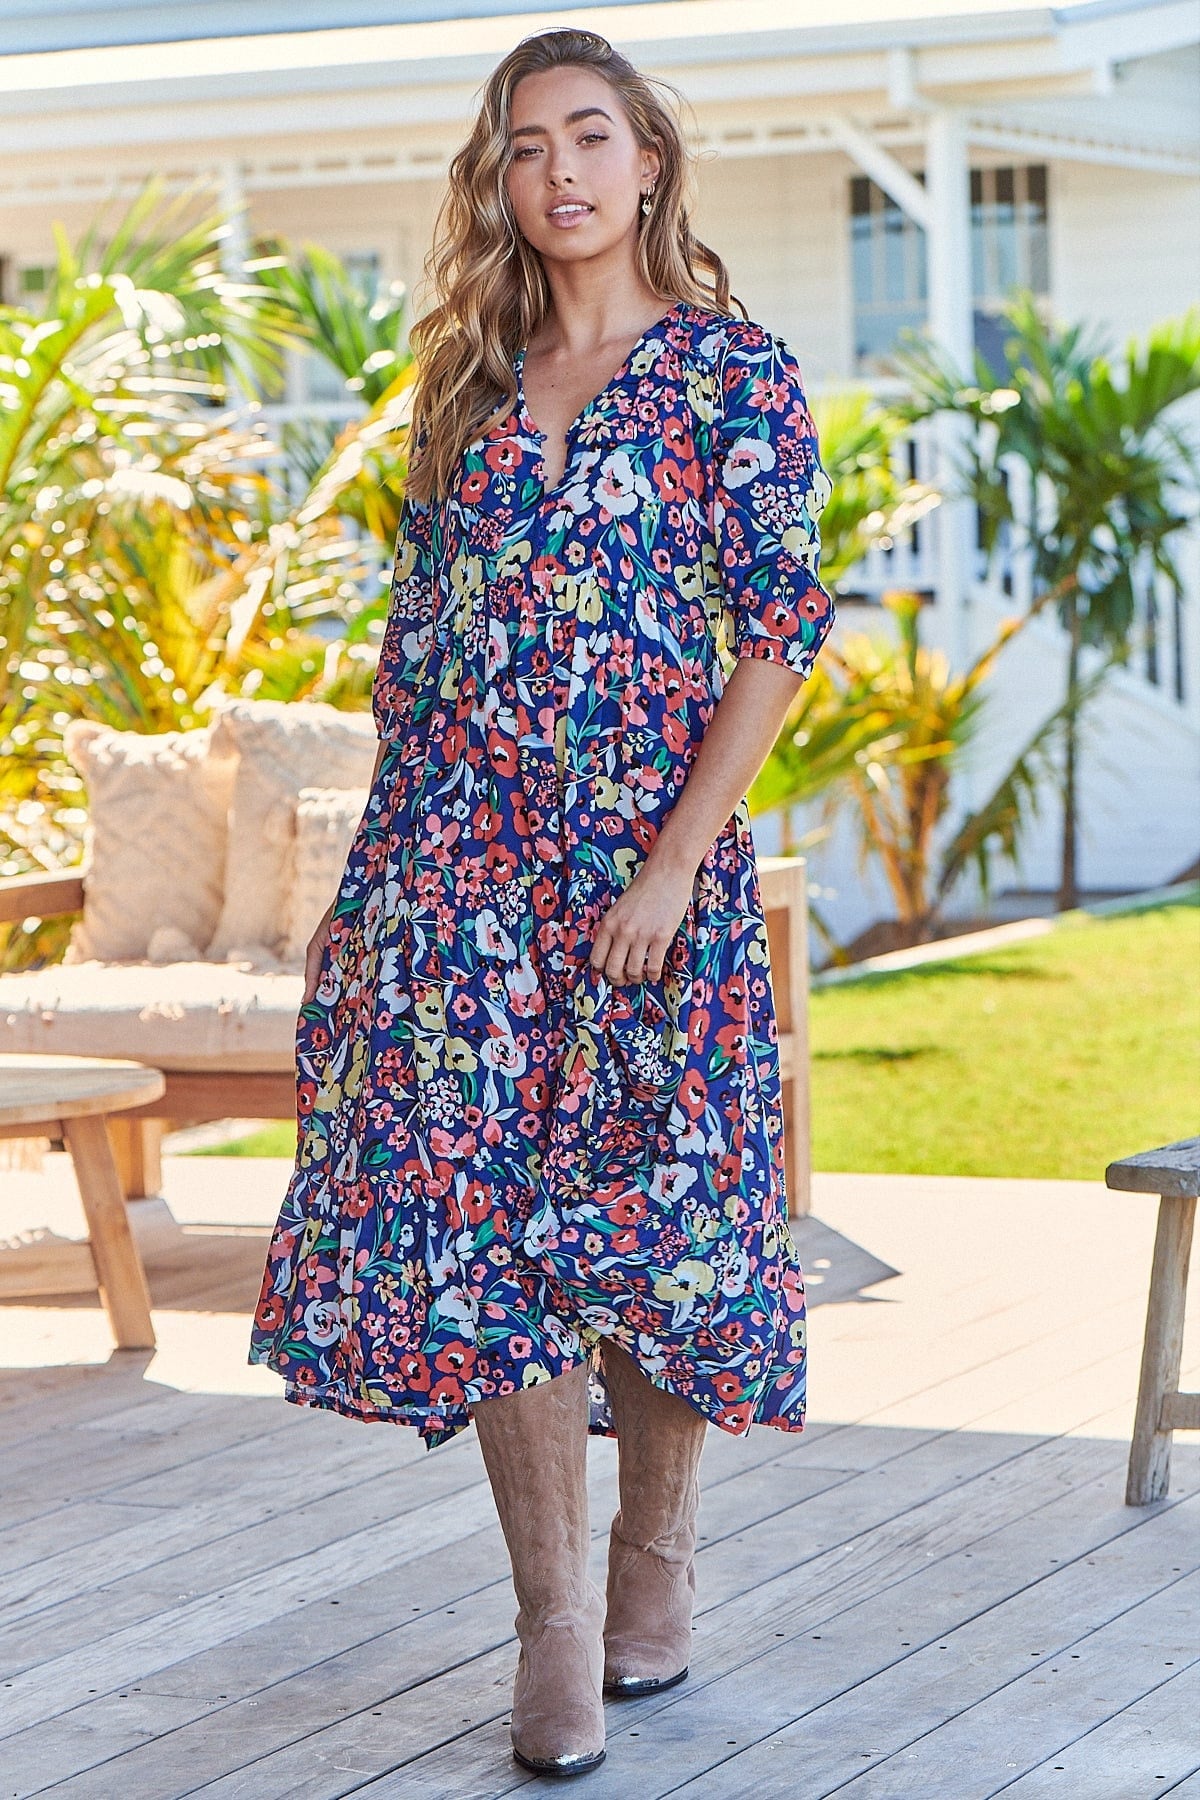 Get ready to stand out in style with the Eve Midi - Carnation Print! This playful dress features a V neckline, detachable tie, buttoned bodice, and long sleeves with elastic cuffs. The frilled hem adds a touch of fun to this unique and quirky piece. Time to add a pop of colour to your wardrobe!